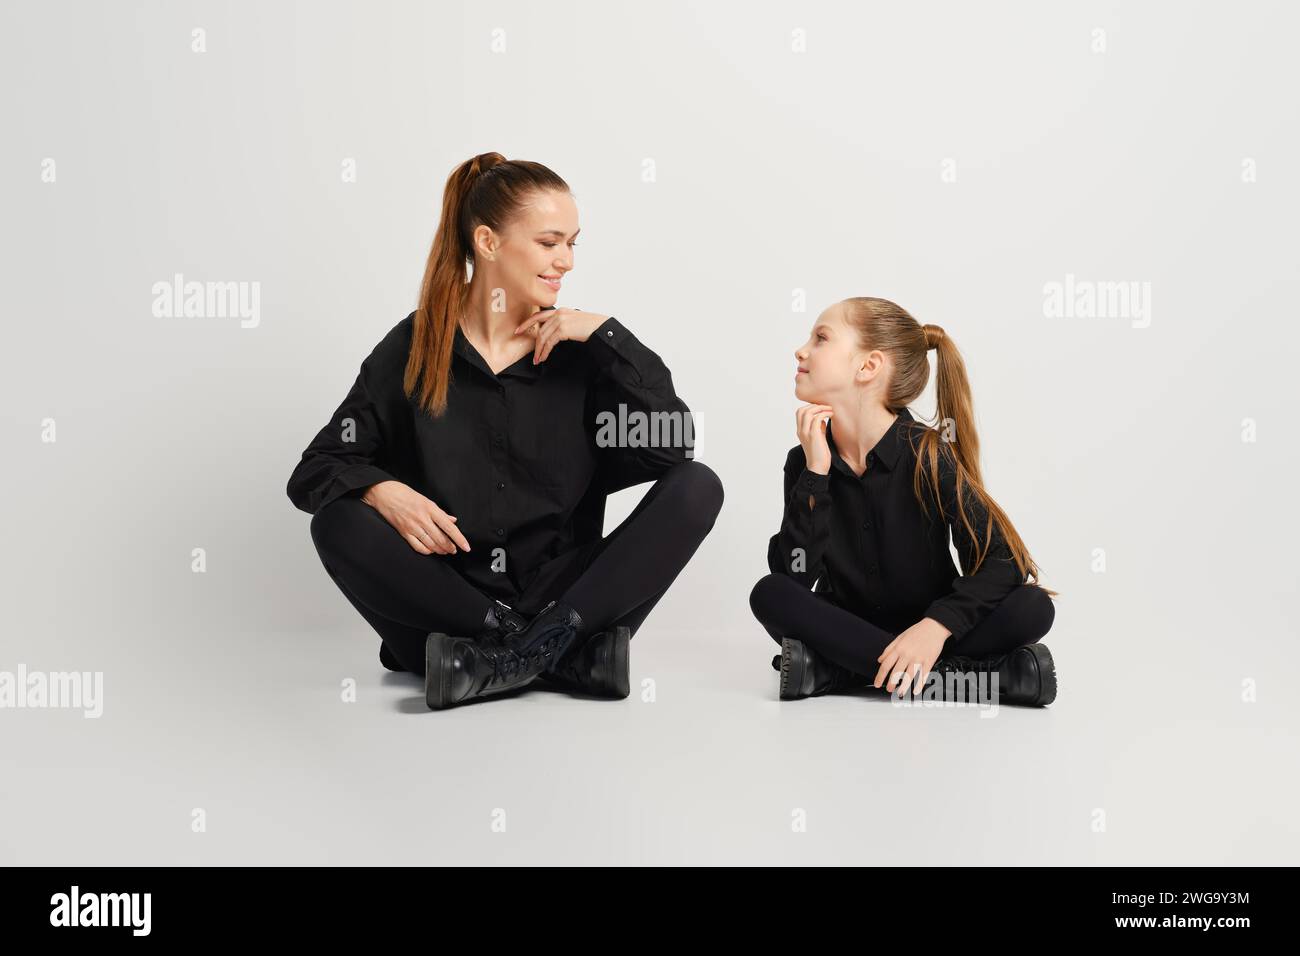 Mother and her daughter are sitting on a white background wearing similar stylish black shirt, tights and boots. They look at each other with smile Stock Photo